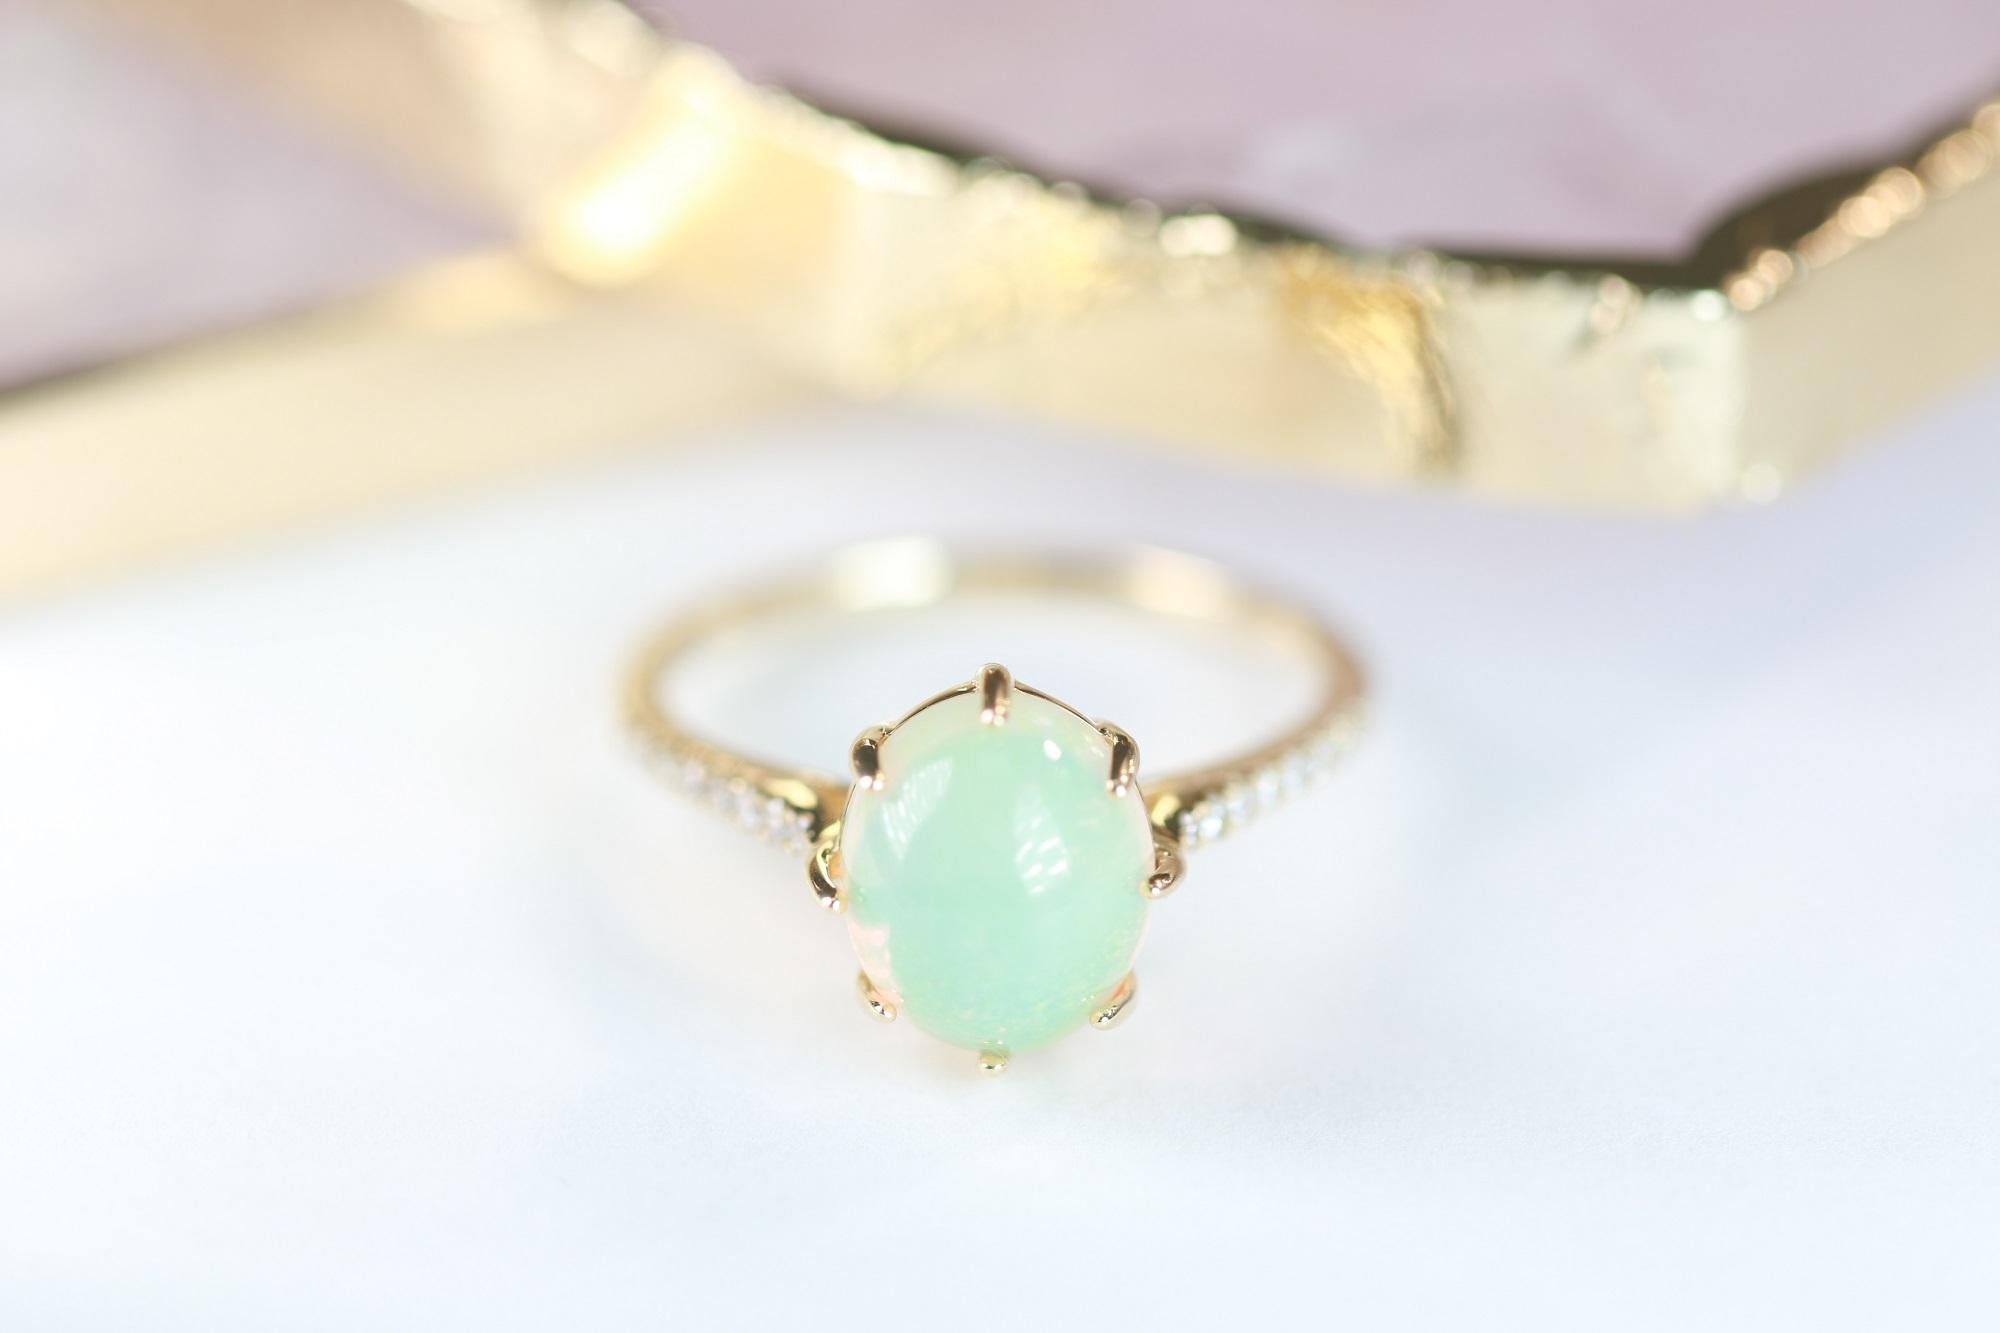 Stunning, timeless and classy eternity Unique Ring. Decorate yourself in luxury with this Gin & Grace Ring. The 14k Yellow Gold jewelry boasts Oval Cab Prong Setting Genuine Ethiopian Opal (1 pcs) 1.99 Carat, along with Natural Round cut white